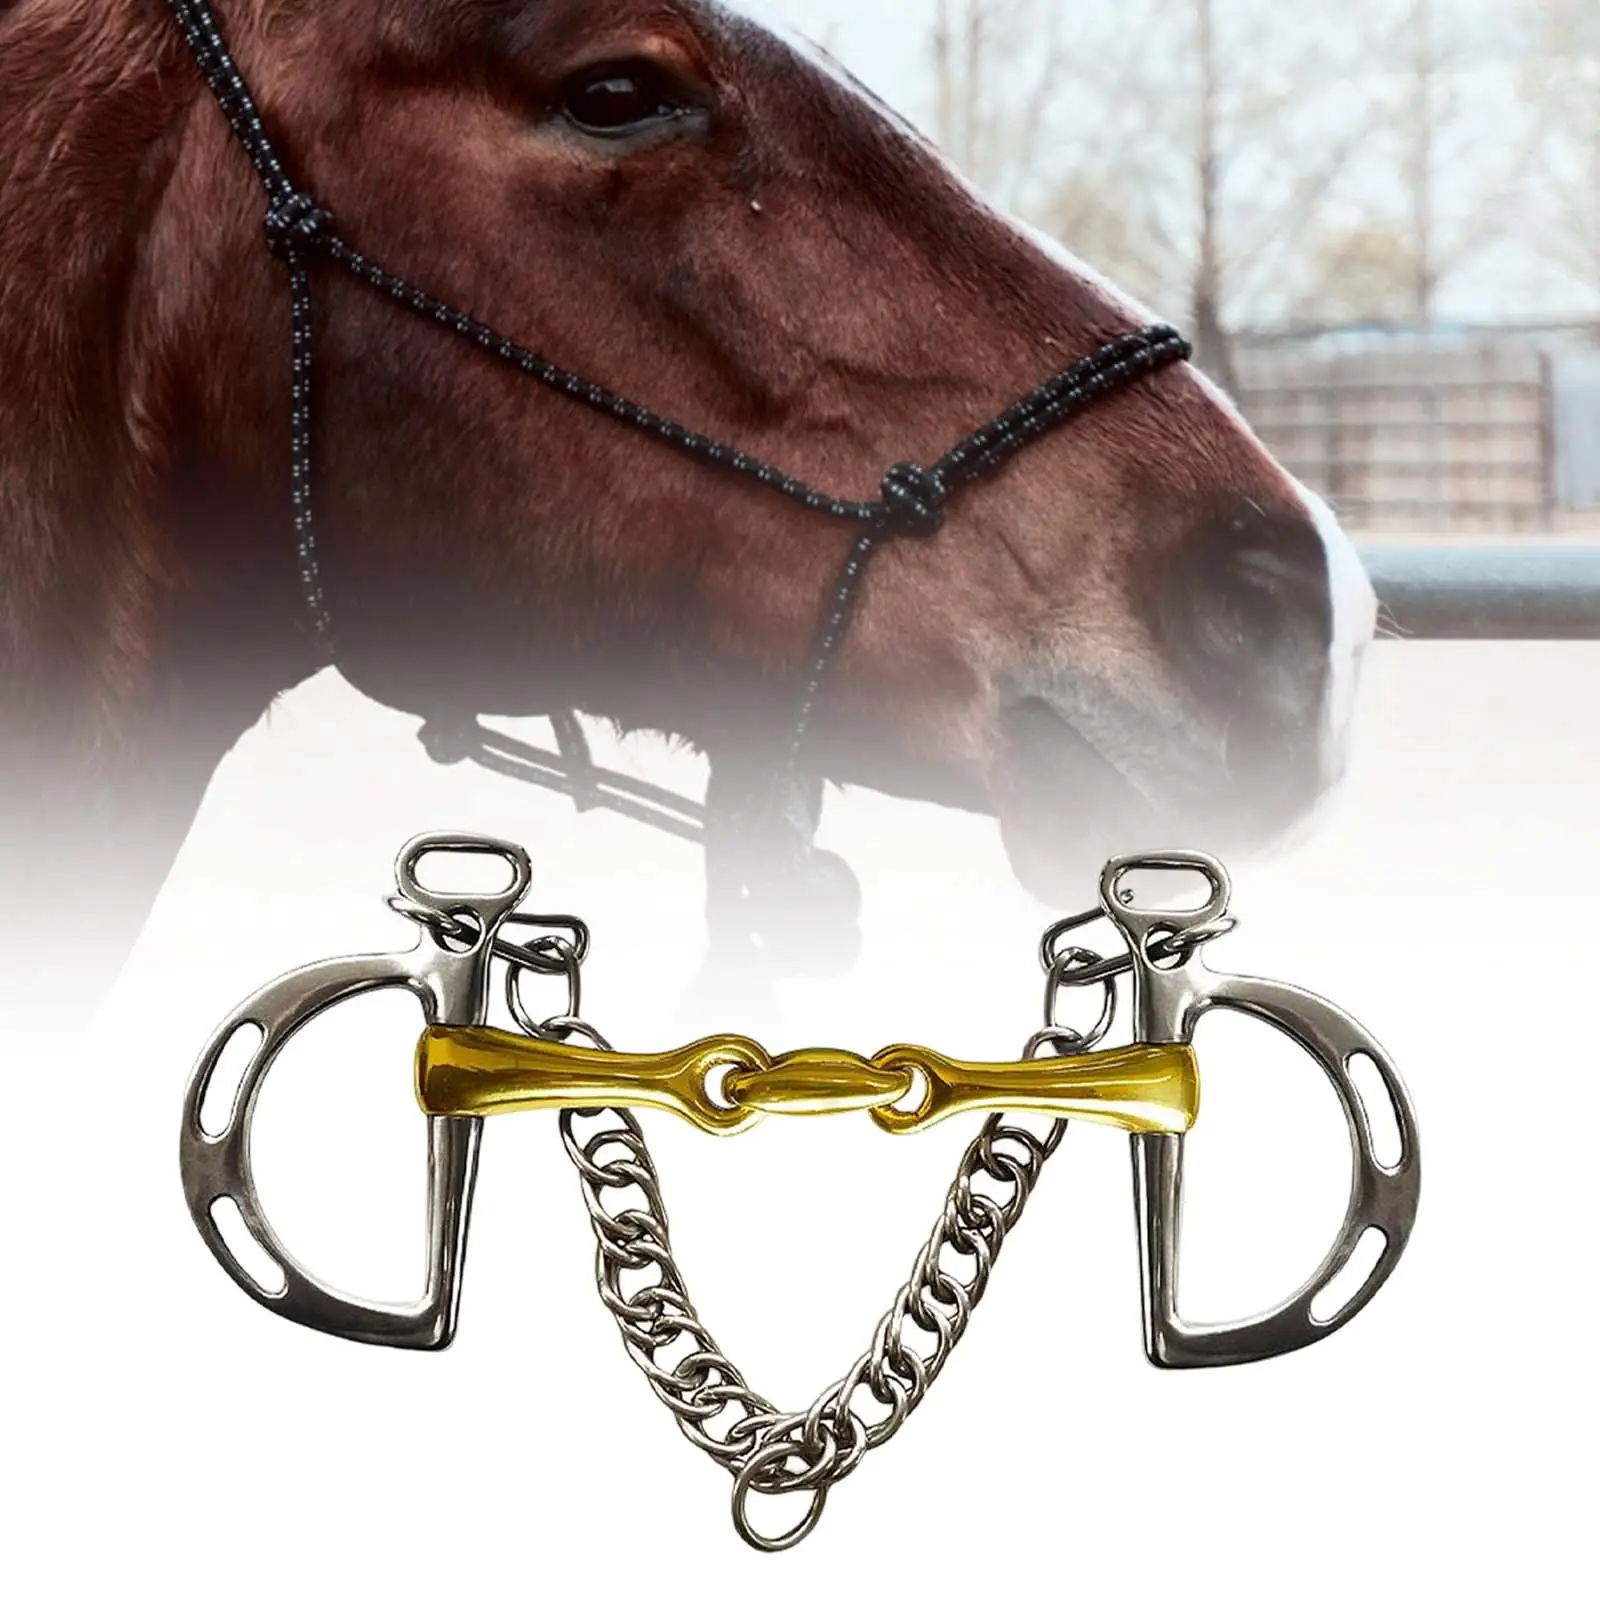 Western Style Horse Bit, Copper Mouth Stainless Steel W/Curb Hooks Chain, with